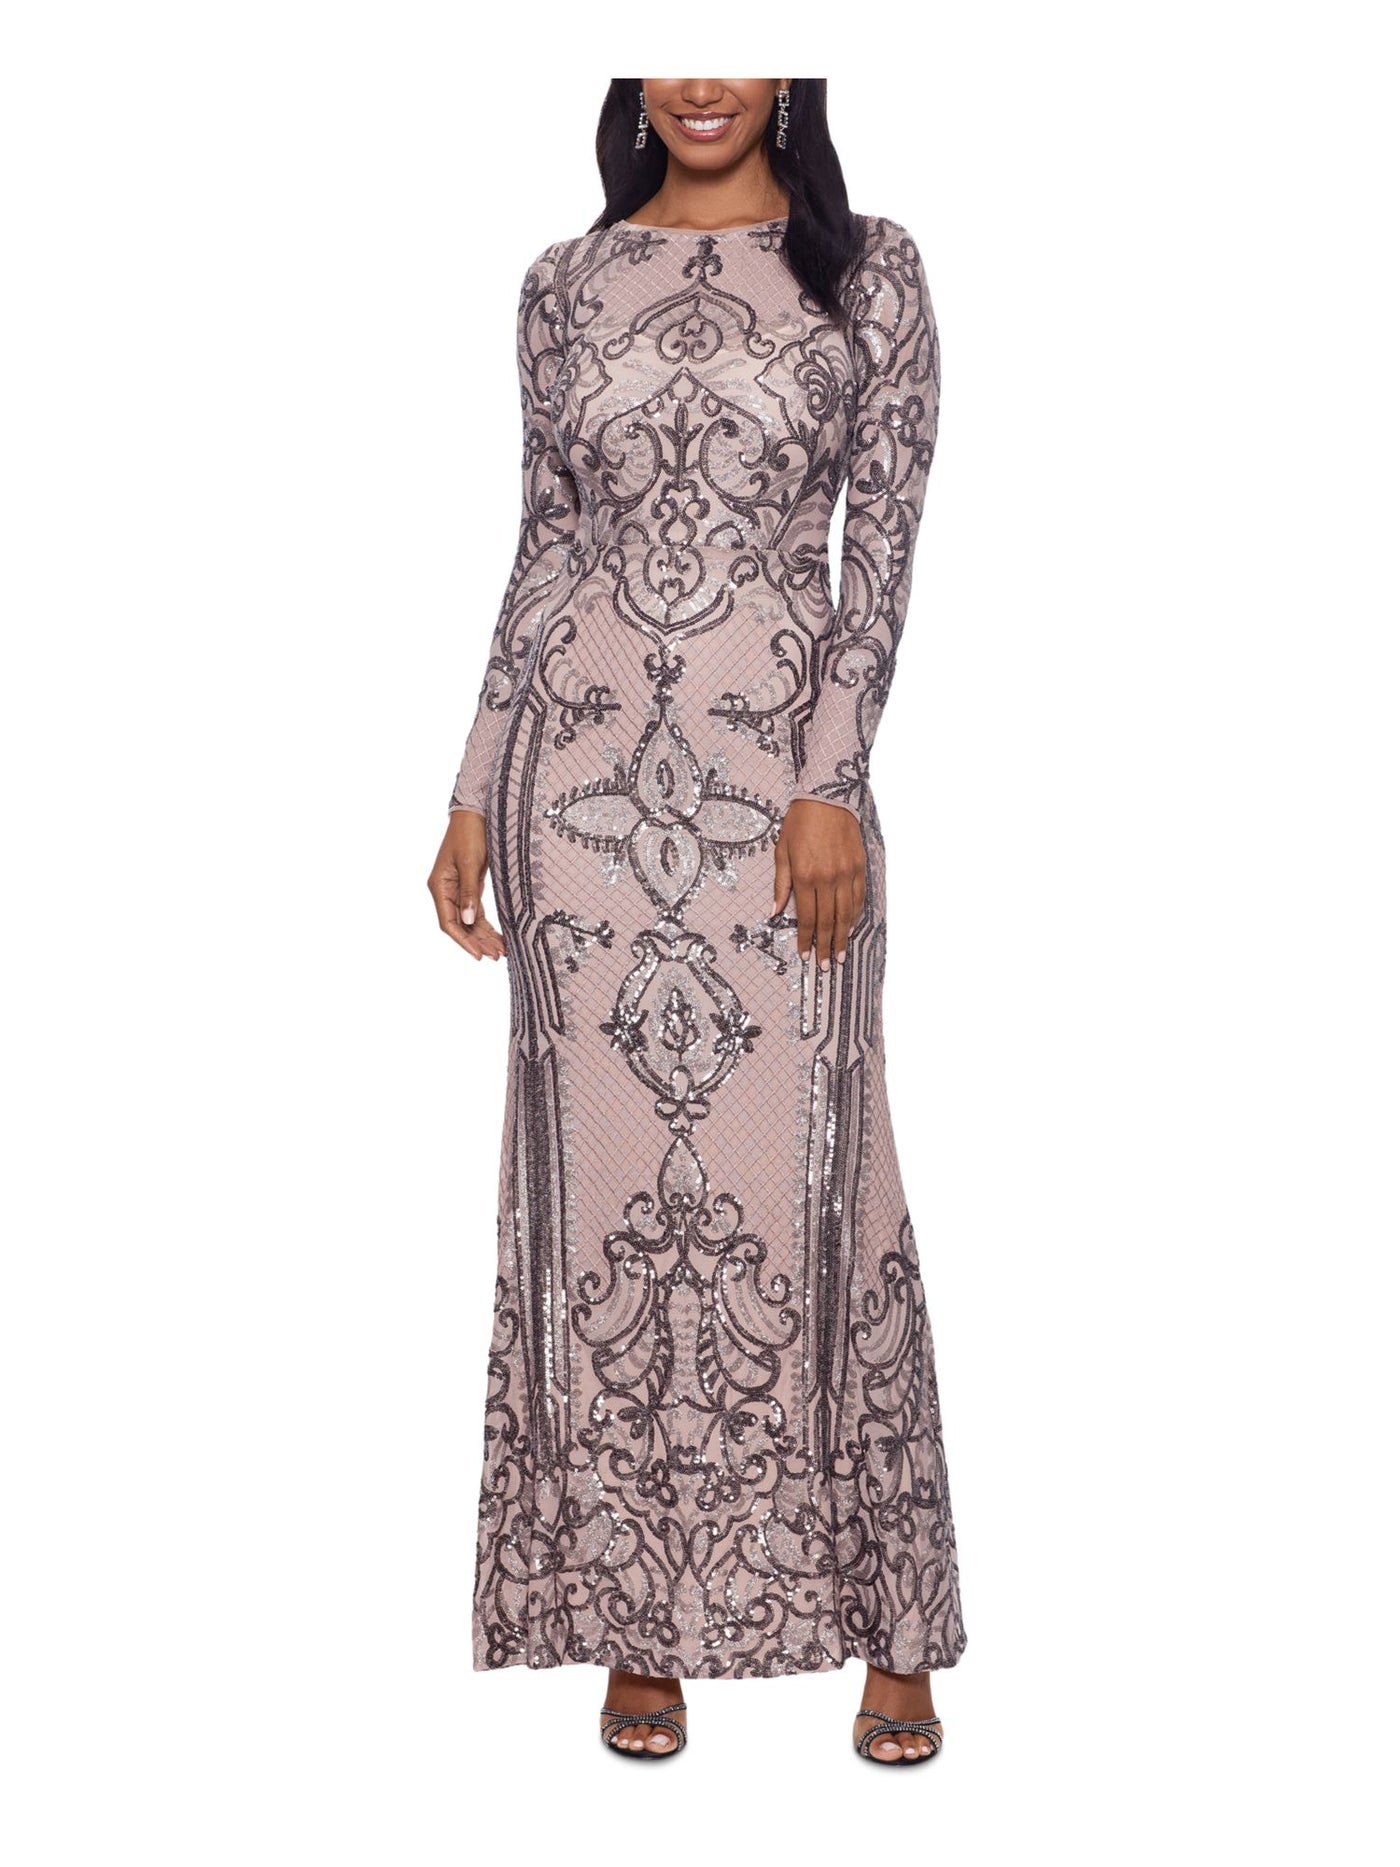 BETSY & ADAM Womens Pink Sequined Long Sleeve Jewel Neck Full-Length Evening Fit + Flare Dress 8P